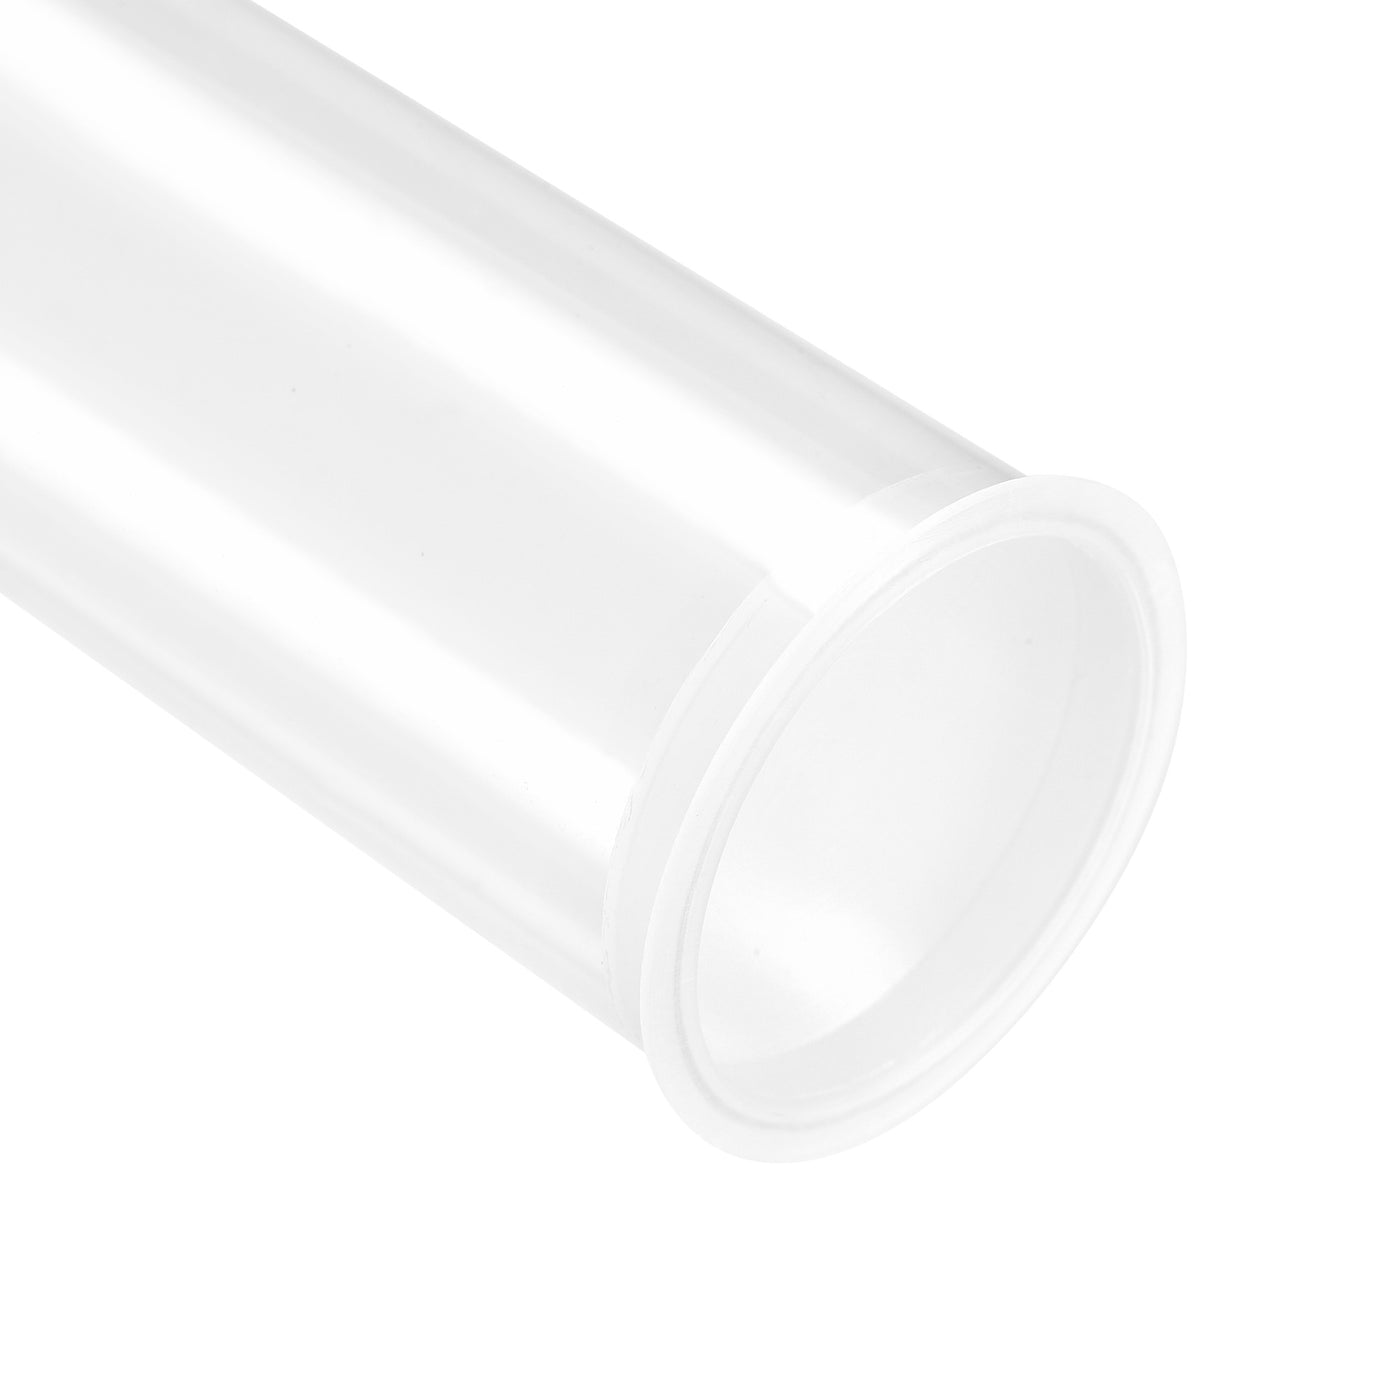 uxcell Uxcell 2pcs Polycarbonate Rigid Round Clear Tubing 41.6mm(1.63 Inch)IDx43mm(1.7 Inch)ODx250mm(9.84 Inch) Length Plastic Storage Transparent Tube with Lids